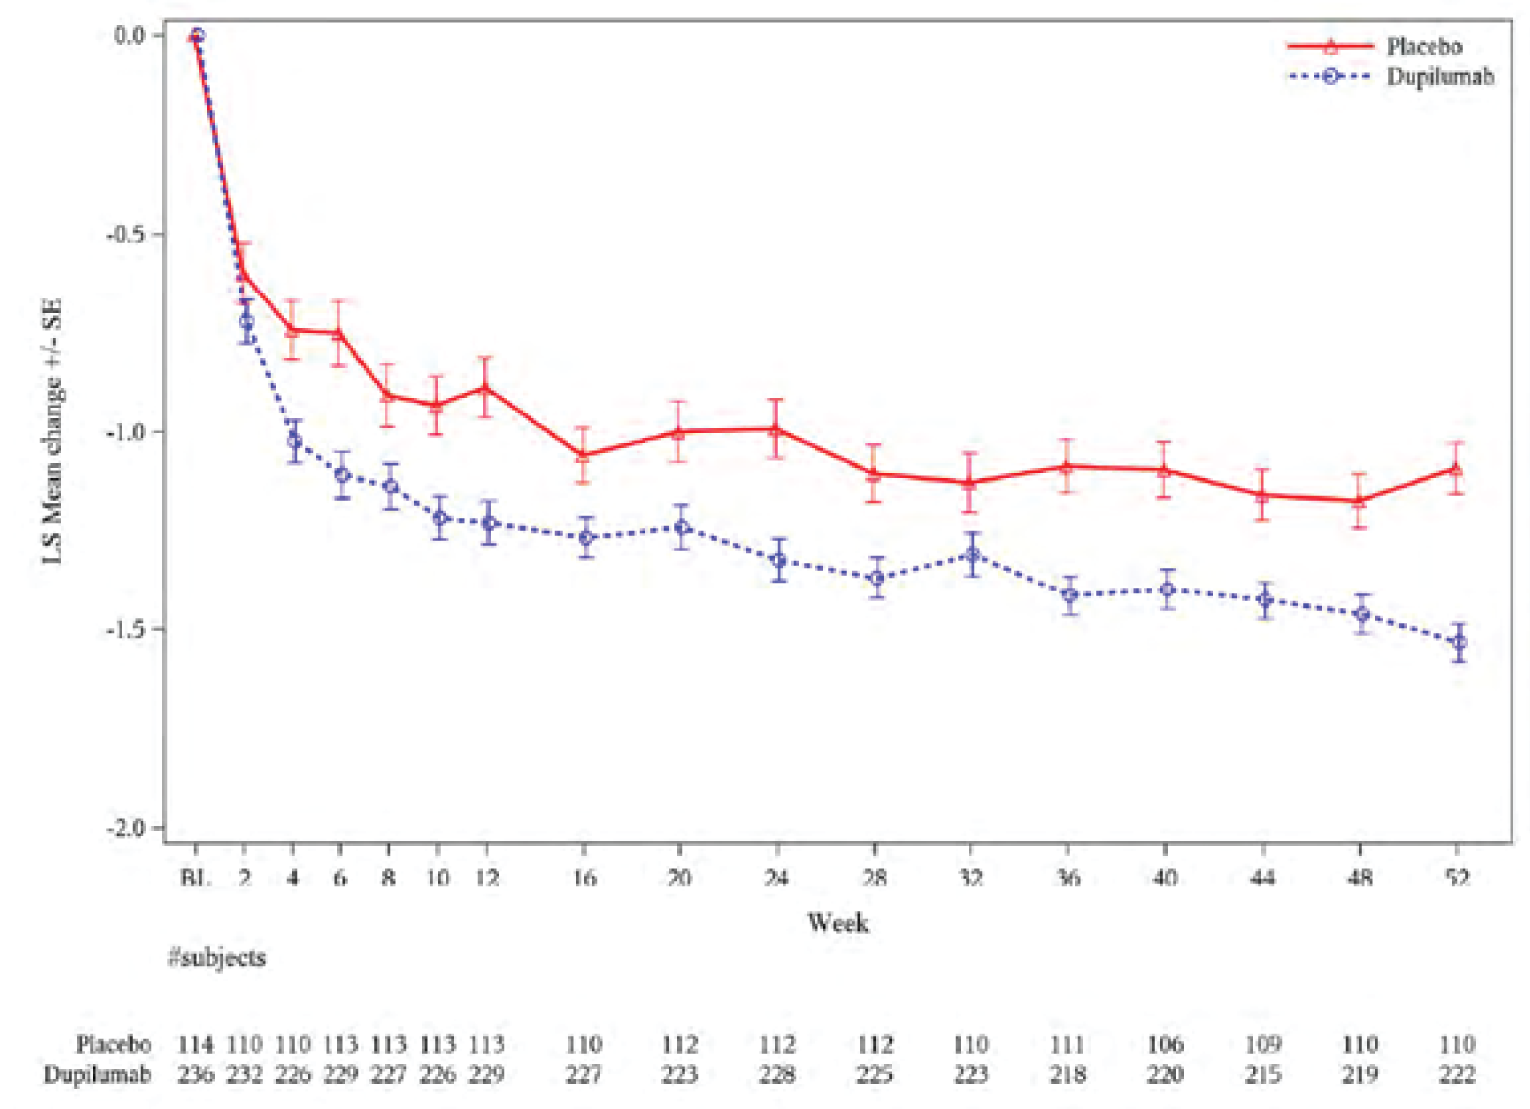 The figure presents mean change from baseline ACQ-7-IA at each time point, for the type 2 inflammatory asthma phenotype population. Least squares mean change from baseline is depicted on the y-axis and week is depicted on the x-axis. The solid red curve represents the placebo group and the dotted blue line represent the dupilumab group. The vertical bars represent the standard errors.